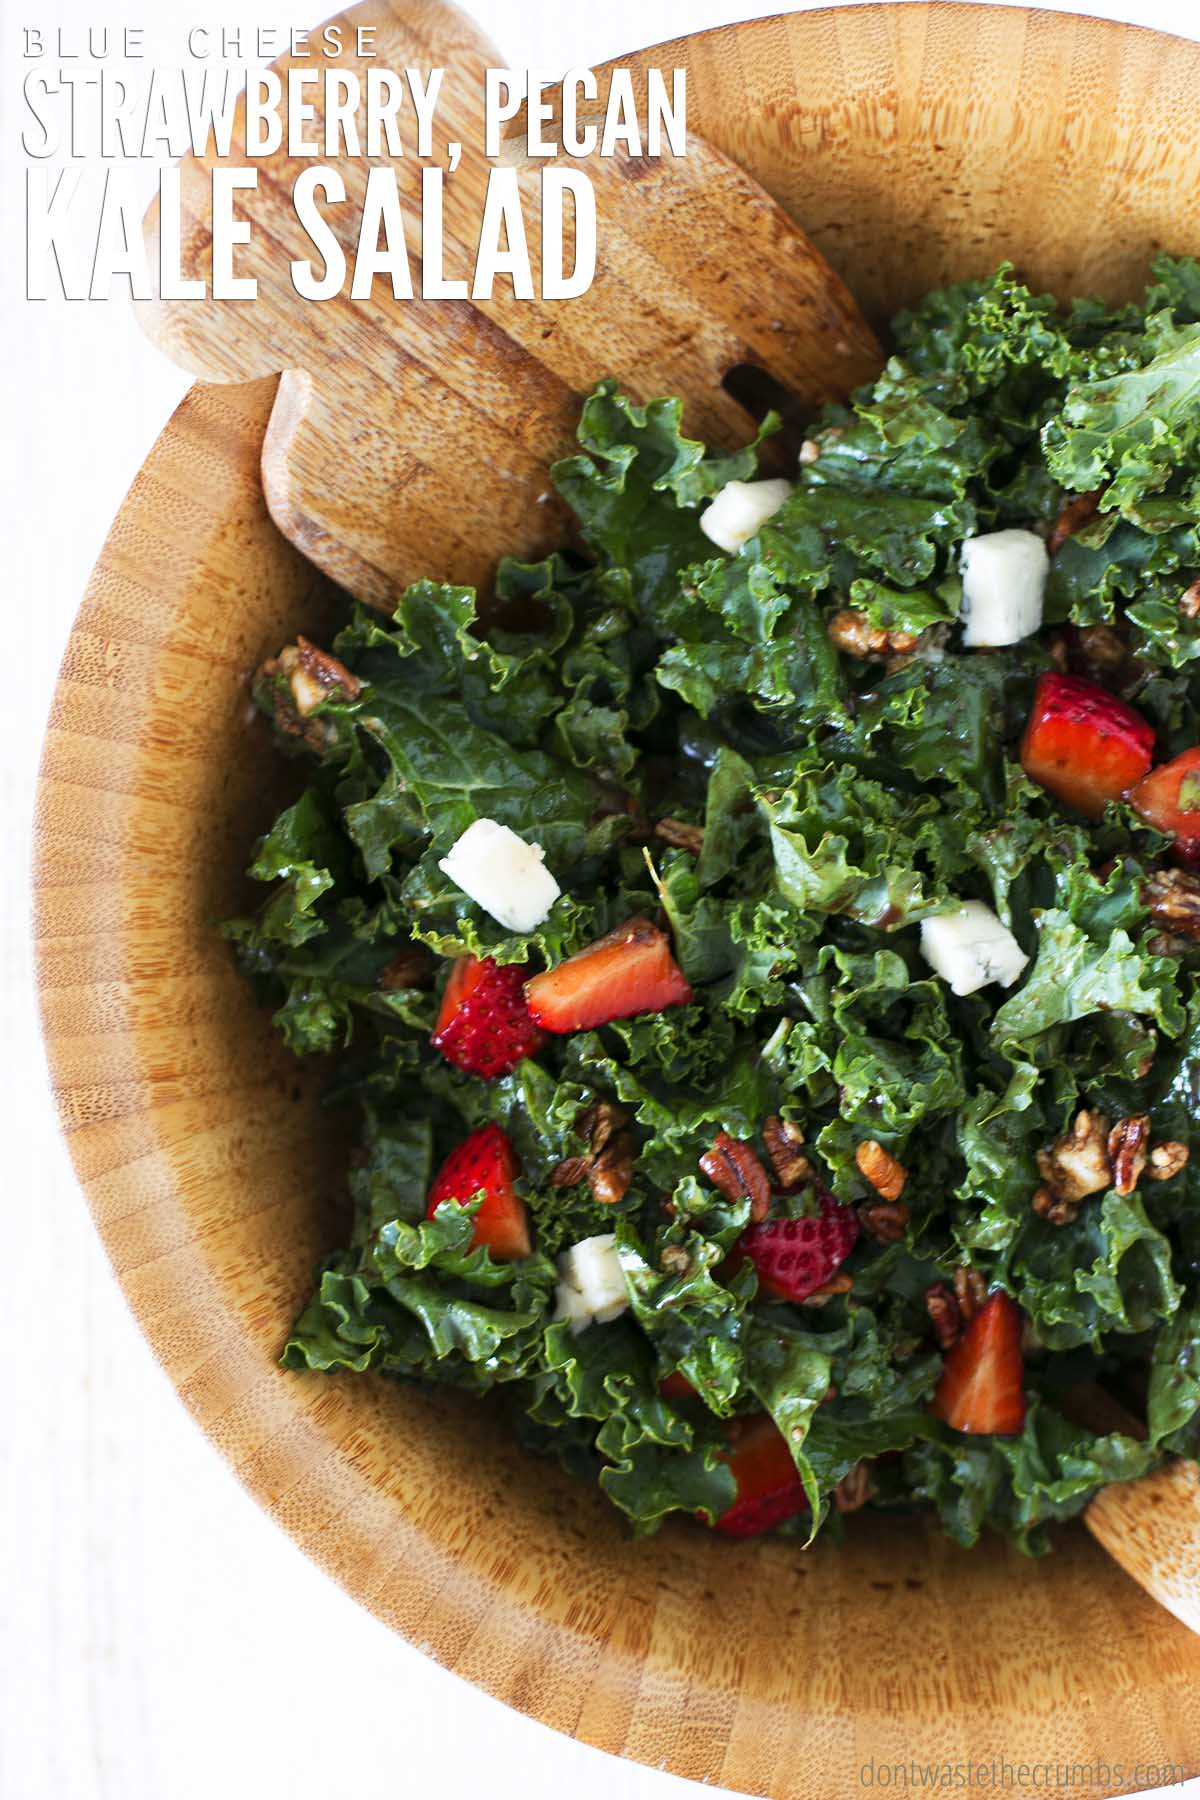 Kale salad recipe with strawberries, pecans, blue cheese.